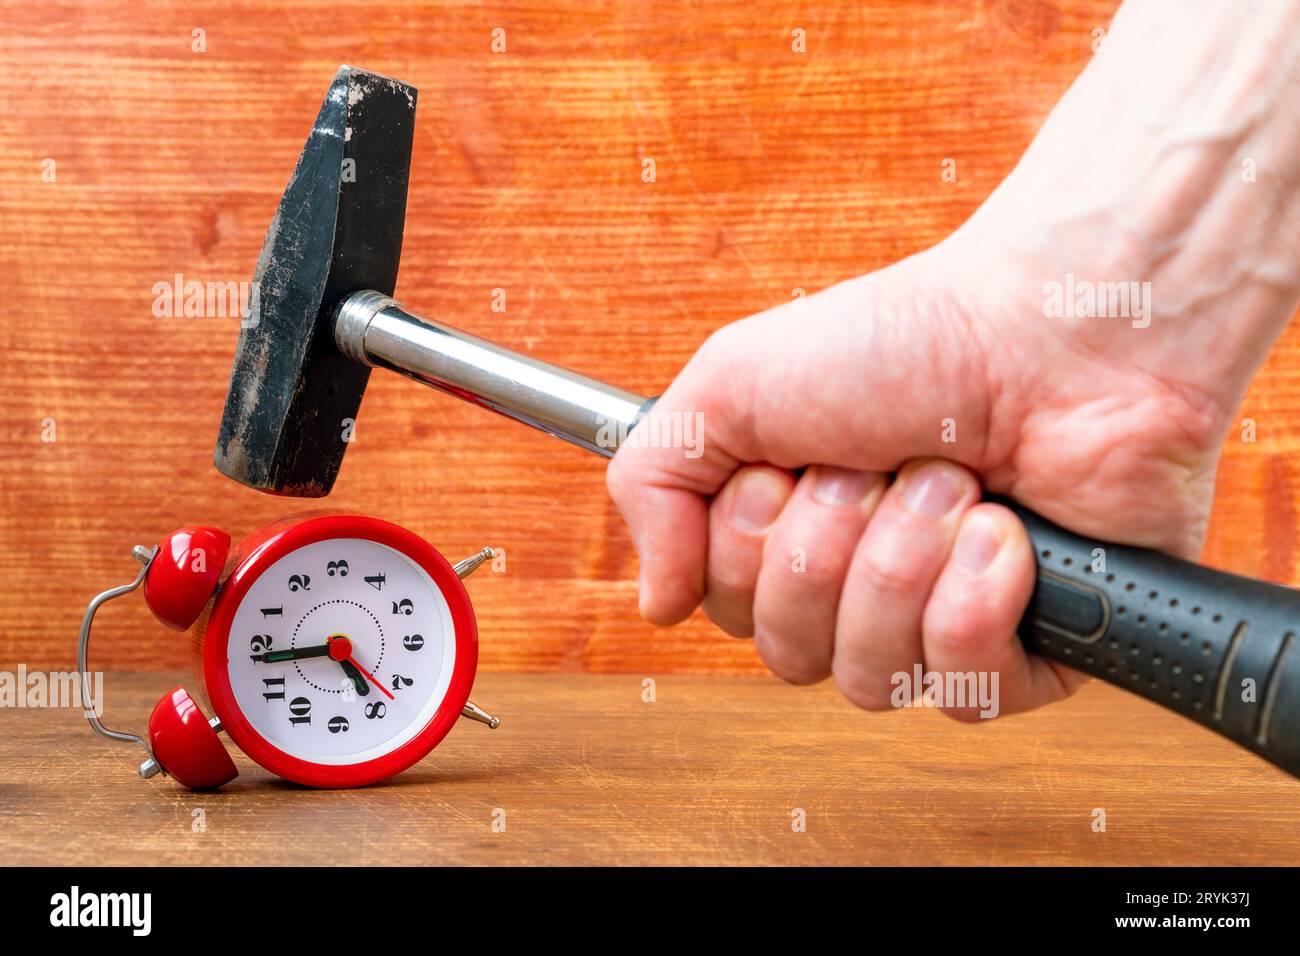 A man smashes an alarm clock with a hammer Stock Photo